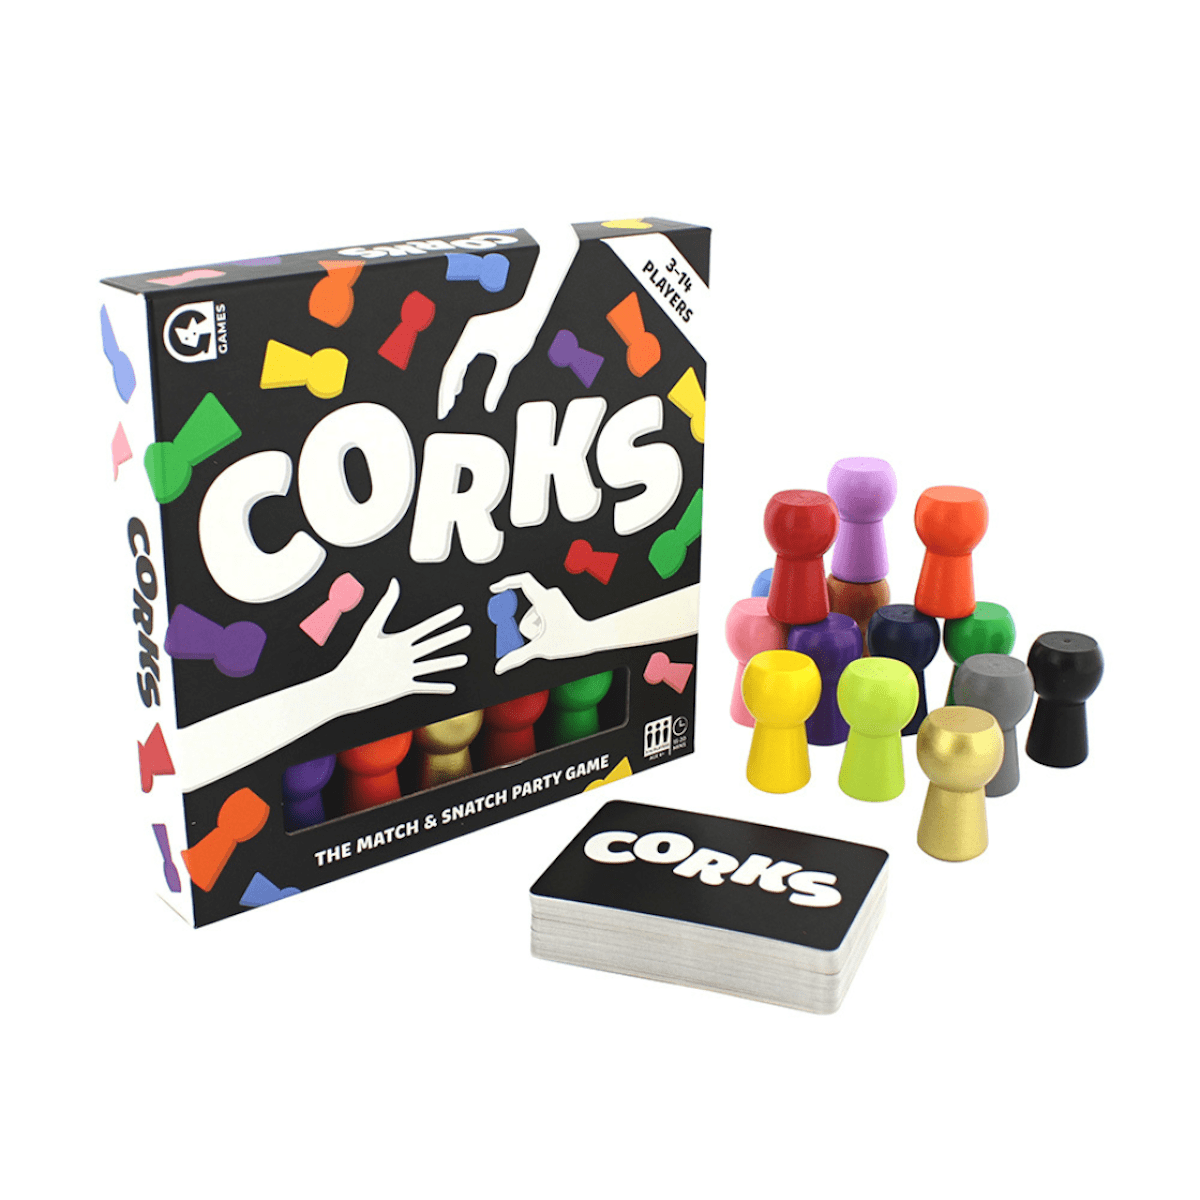 Ginger Fox Games Corks Match and Snatch Party Game